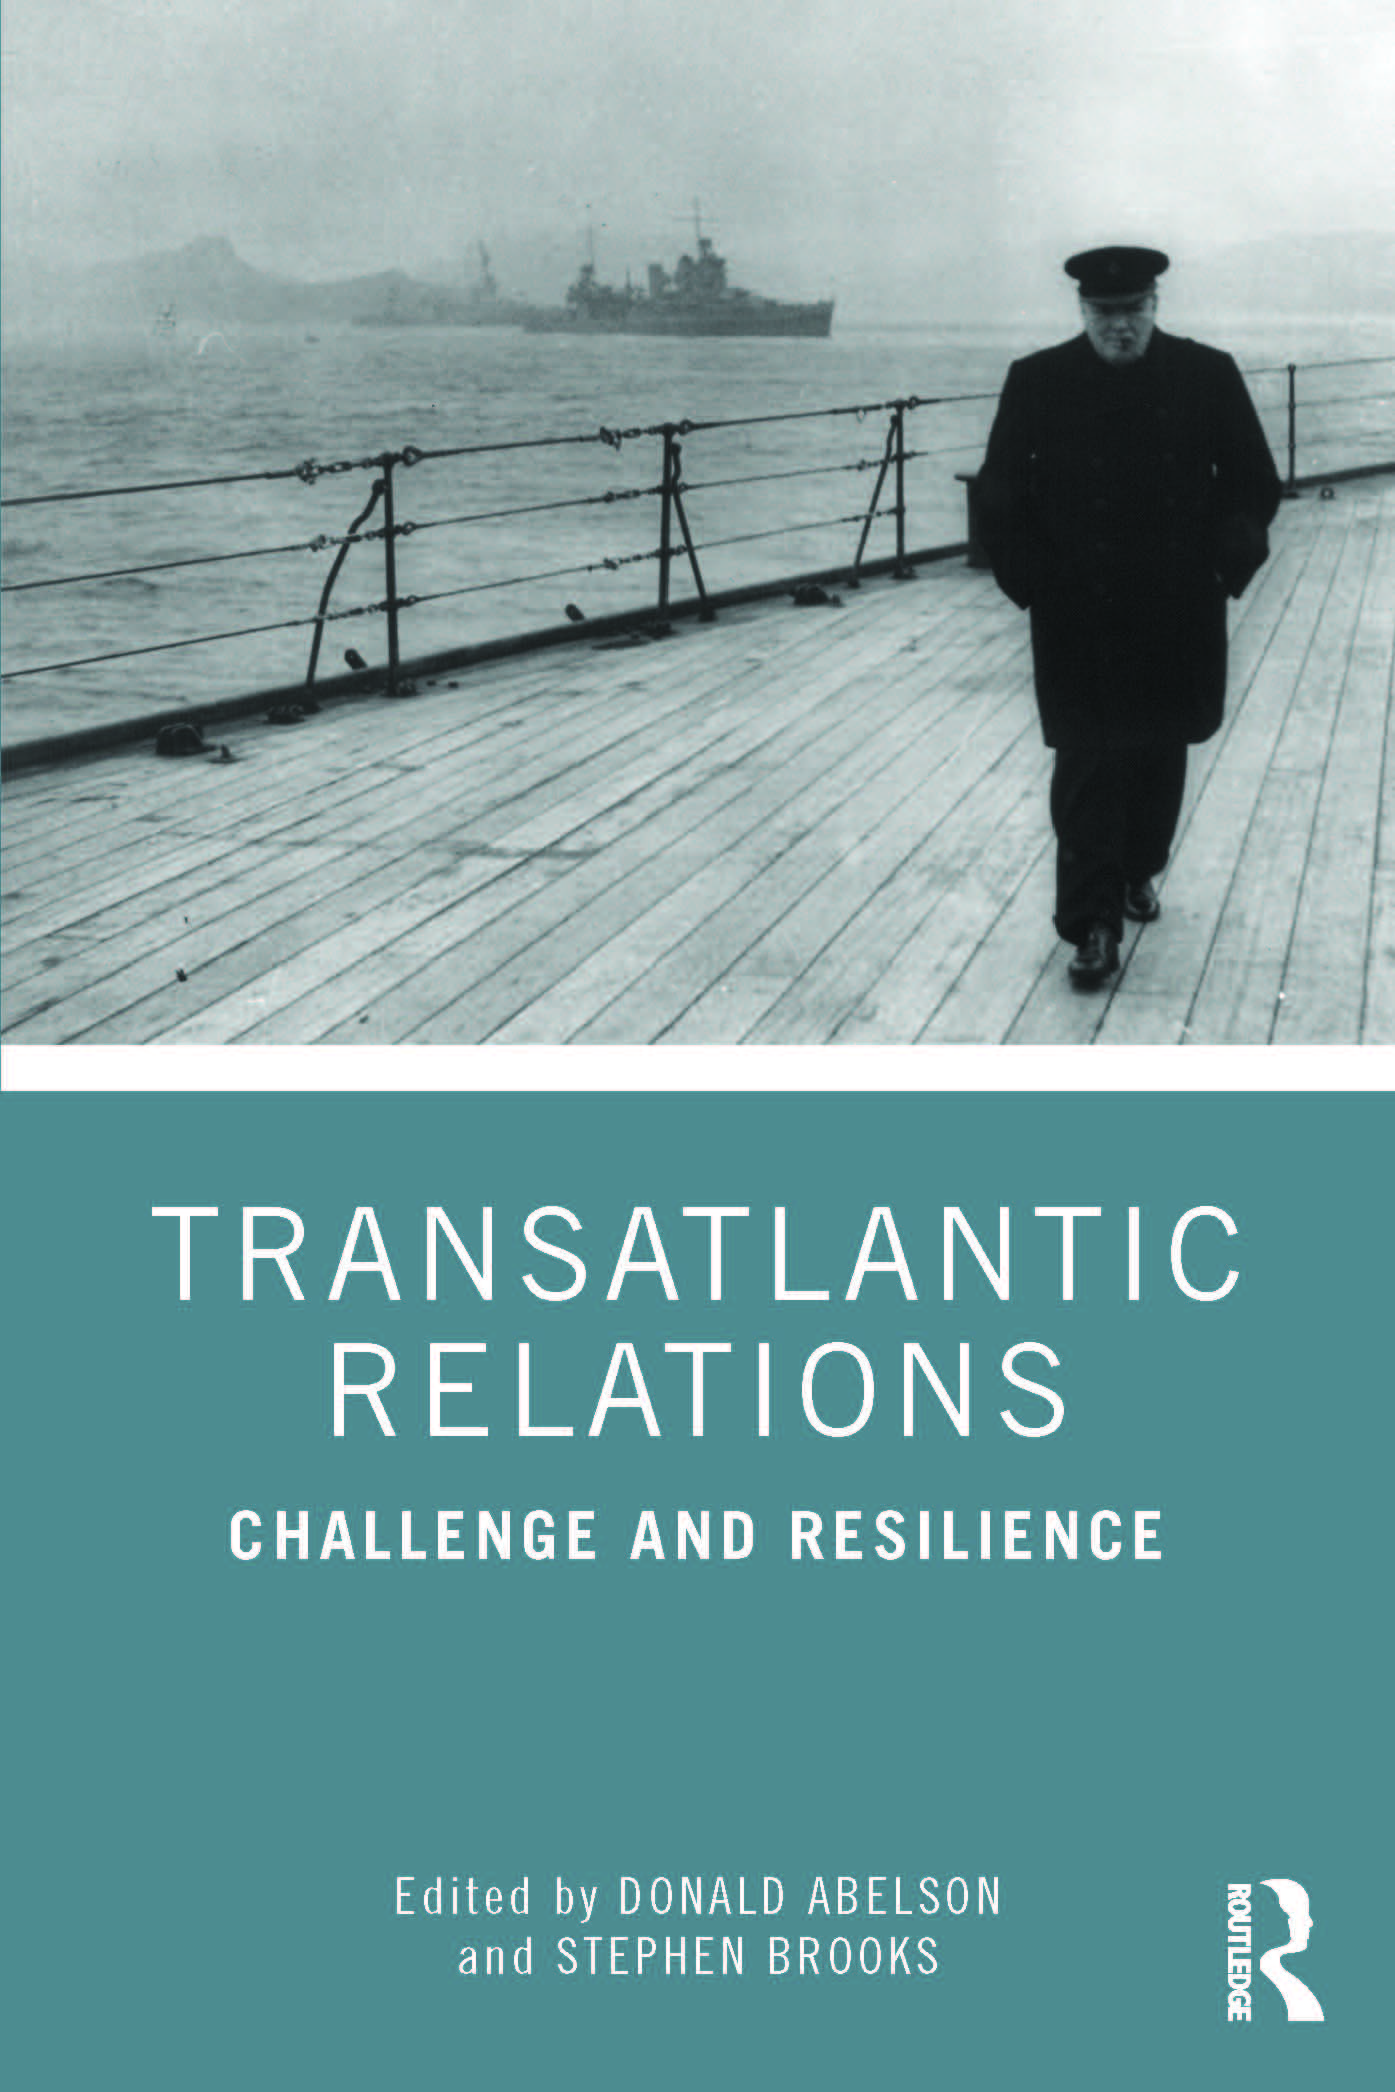 Transatlantic Relations: Challenge and Resilience – A Discussion for Our Times